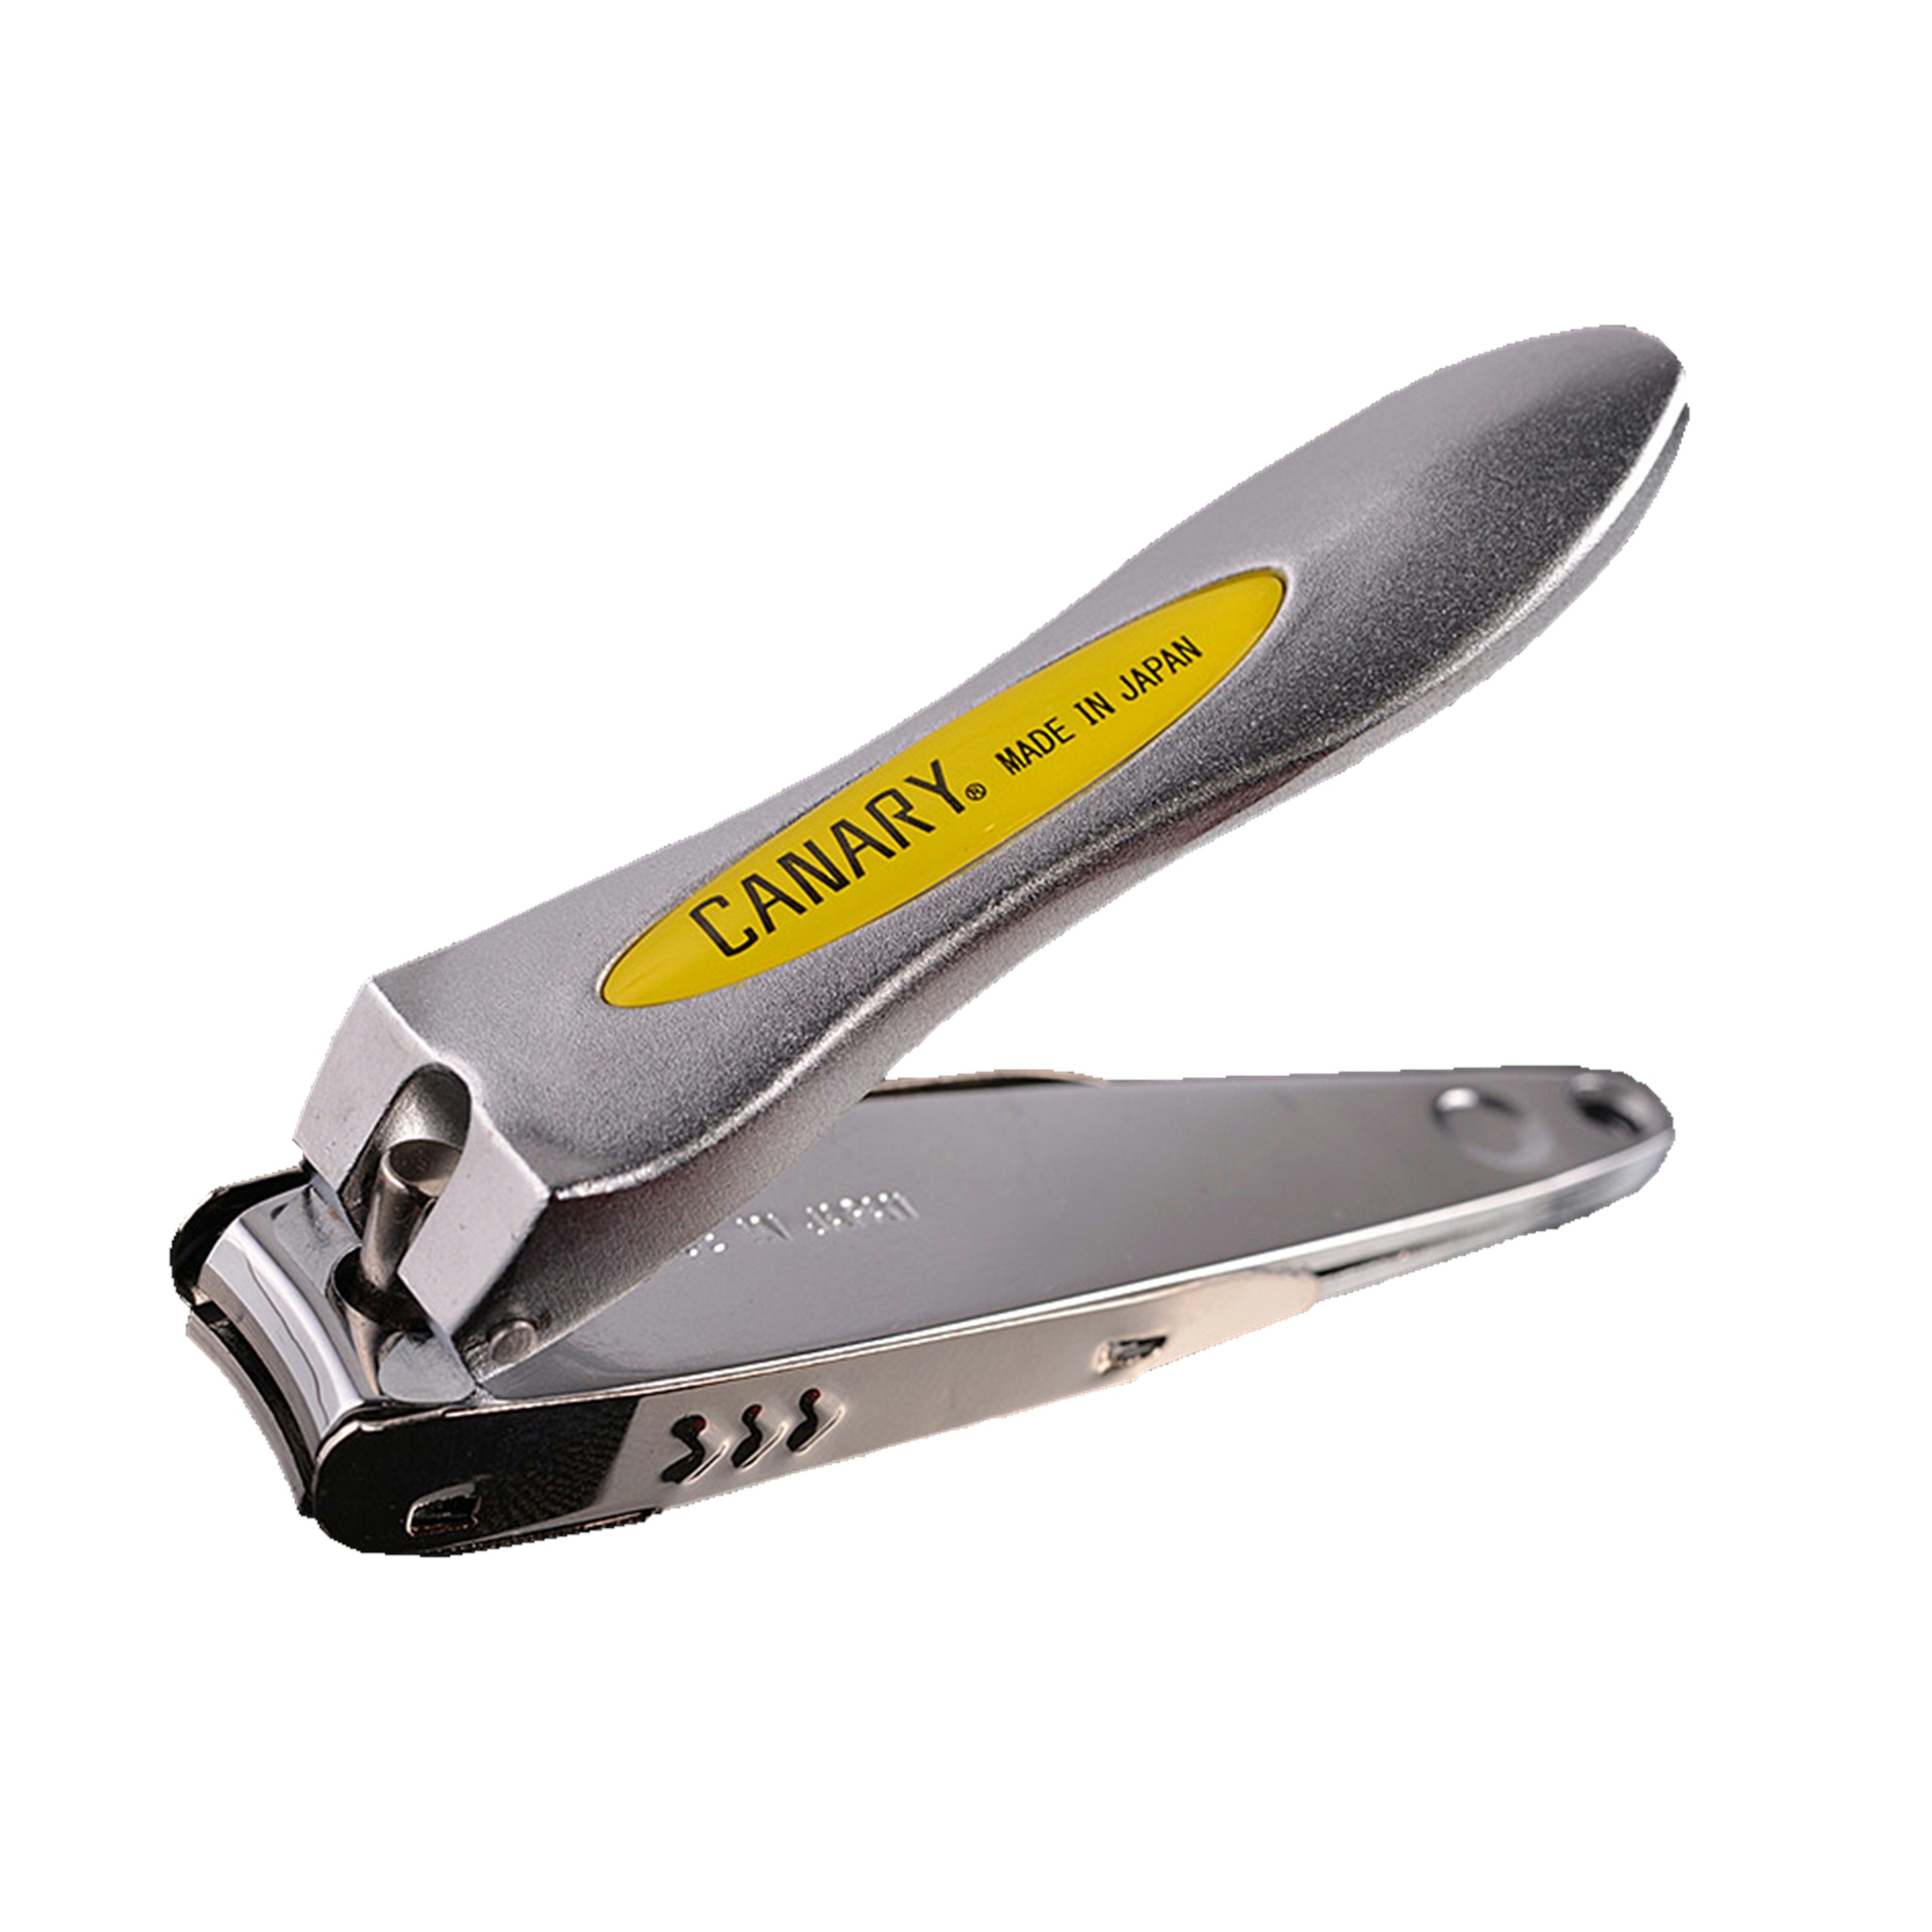 Wholesale Greenbell Nail Cutter Supplier from Kolkata India